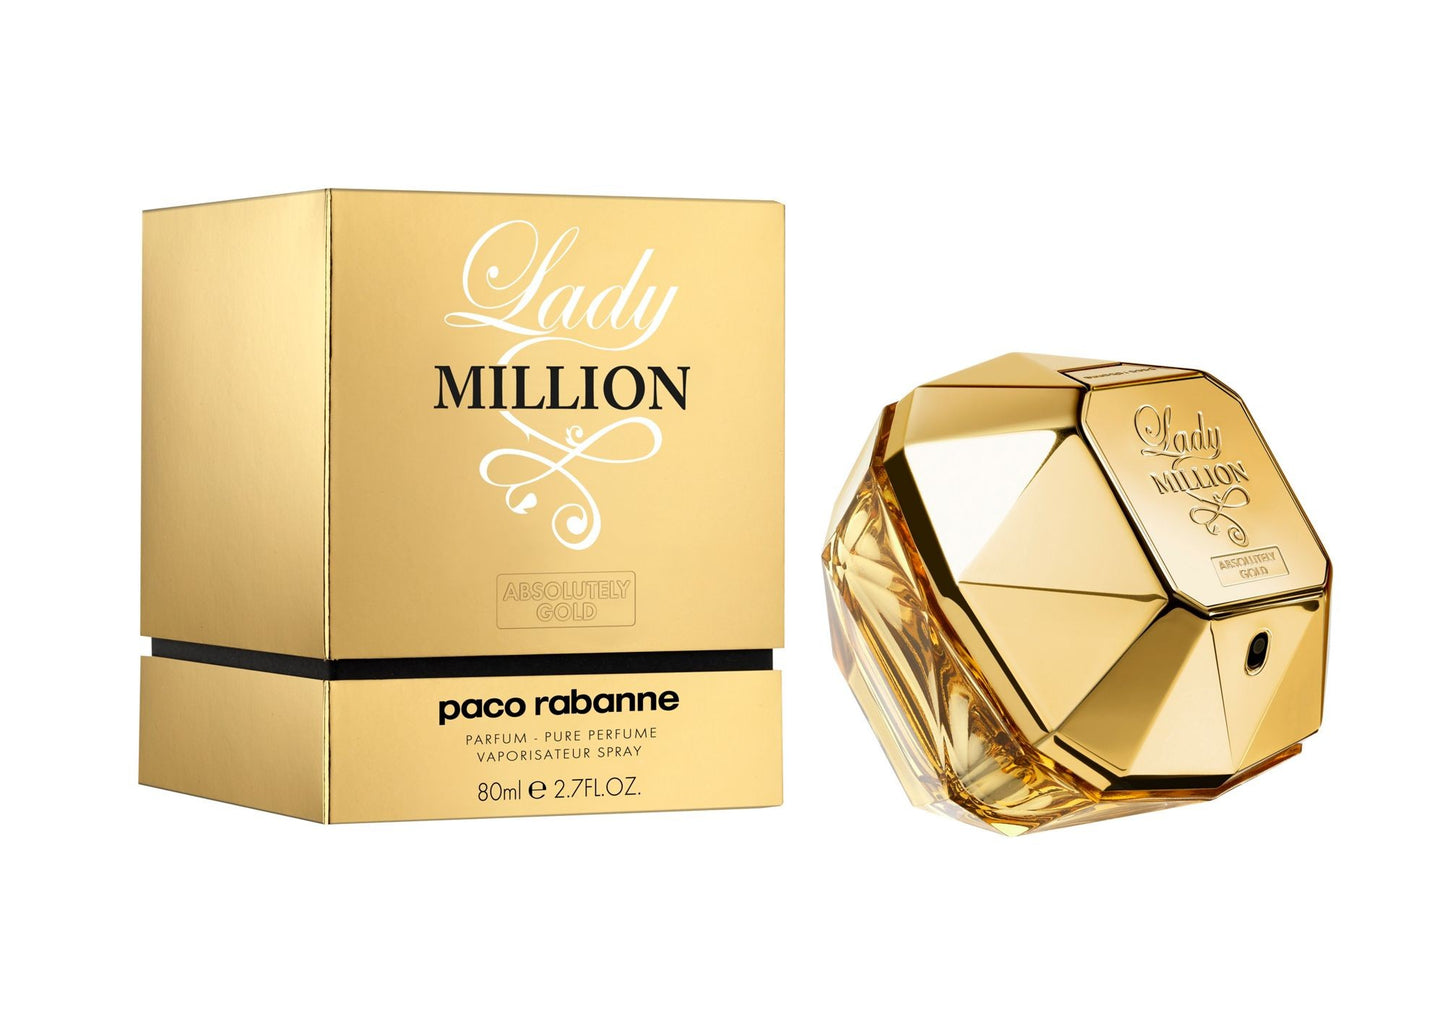 Paco Rabanne Lady Million Absolutely Gold for Women 80ml EDP